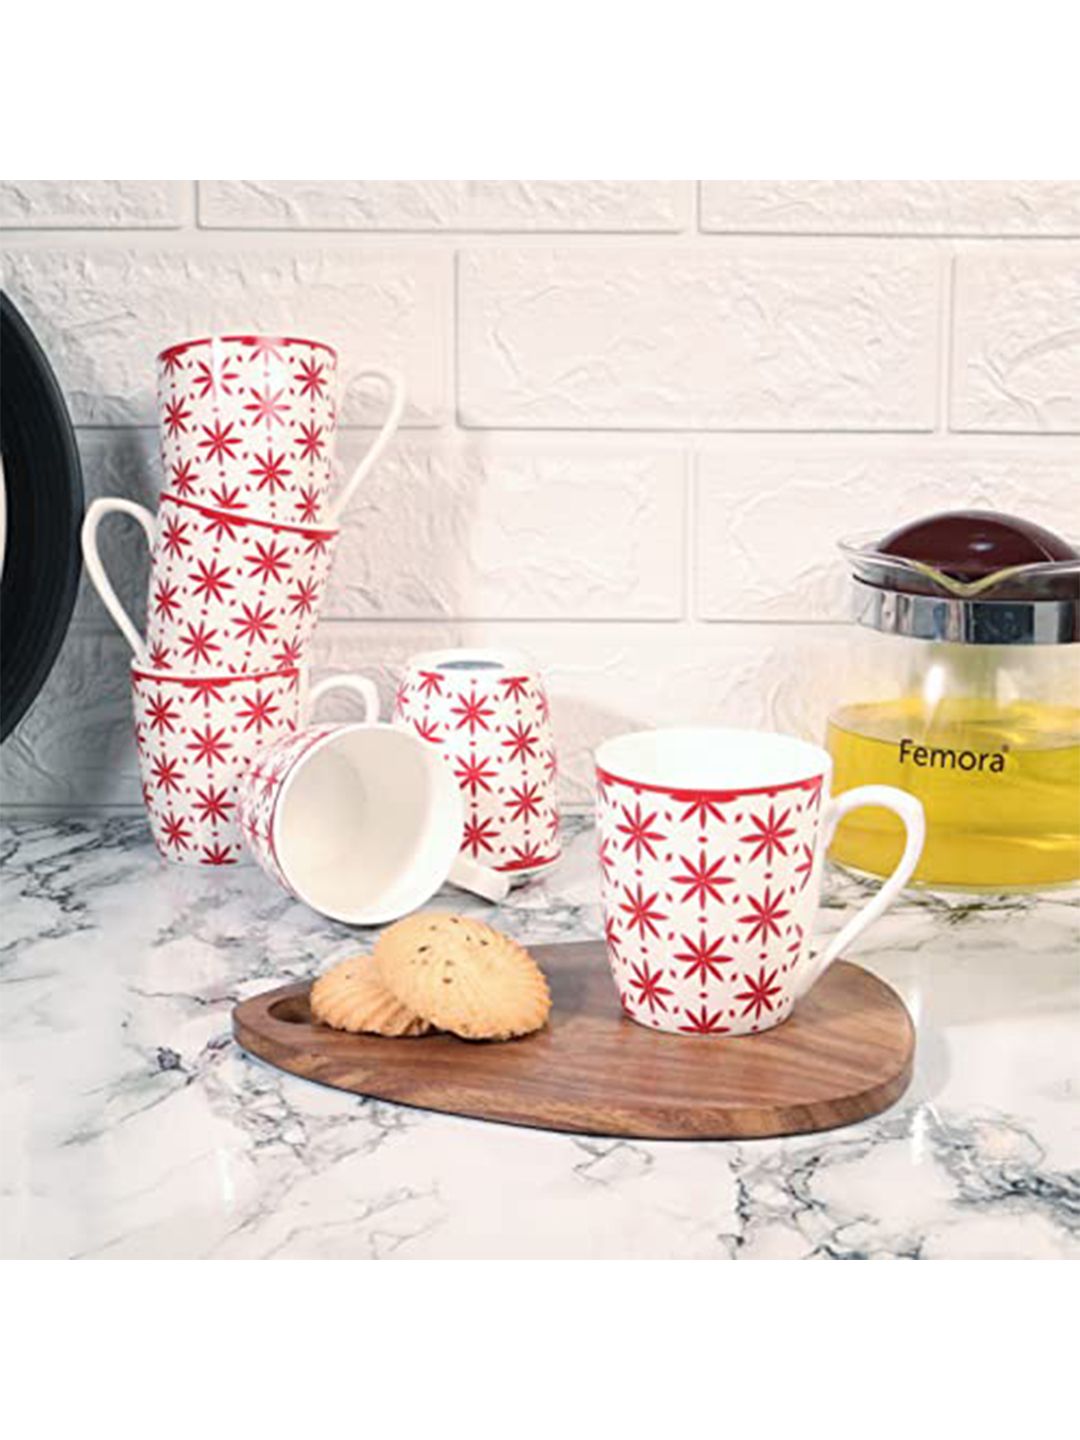 Femora White & Red Printed Bone China Glossy Cups Set of 6 Price in India